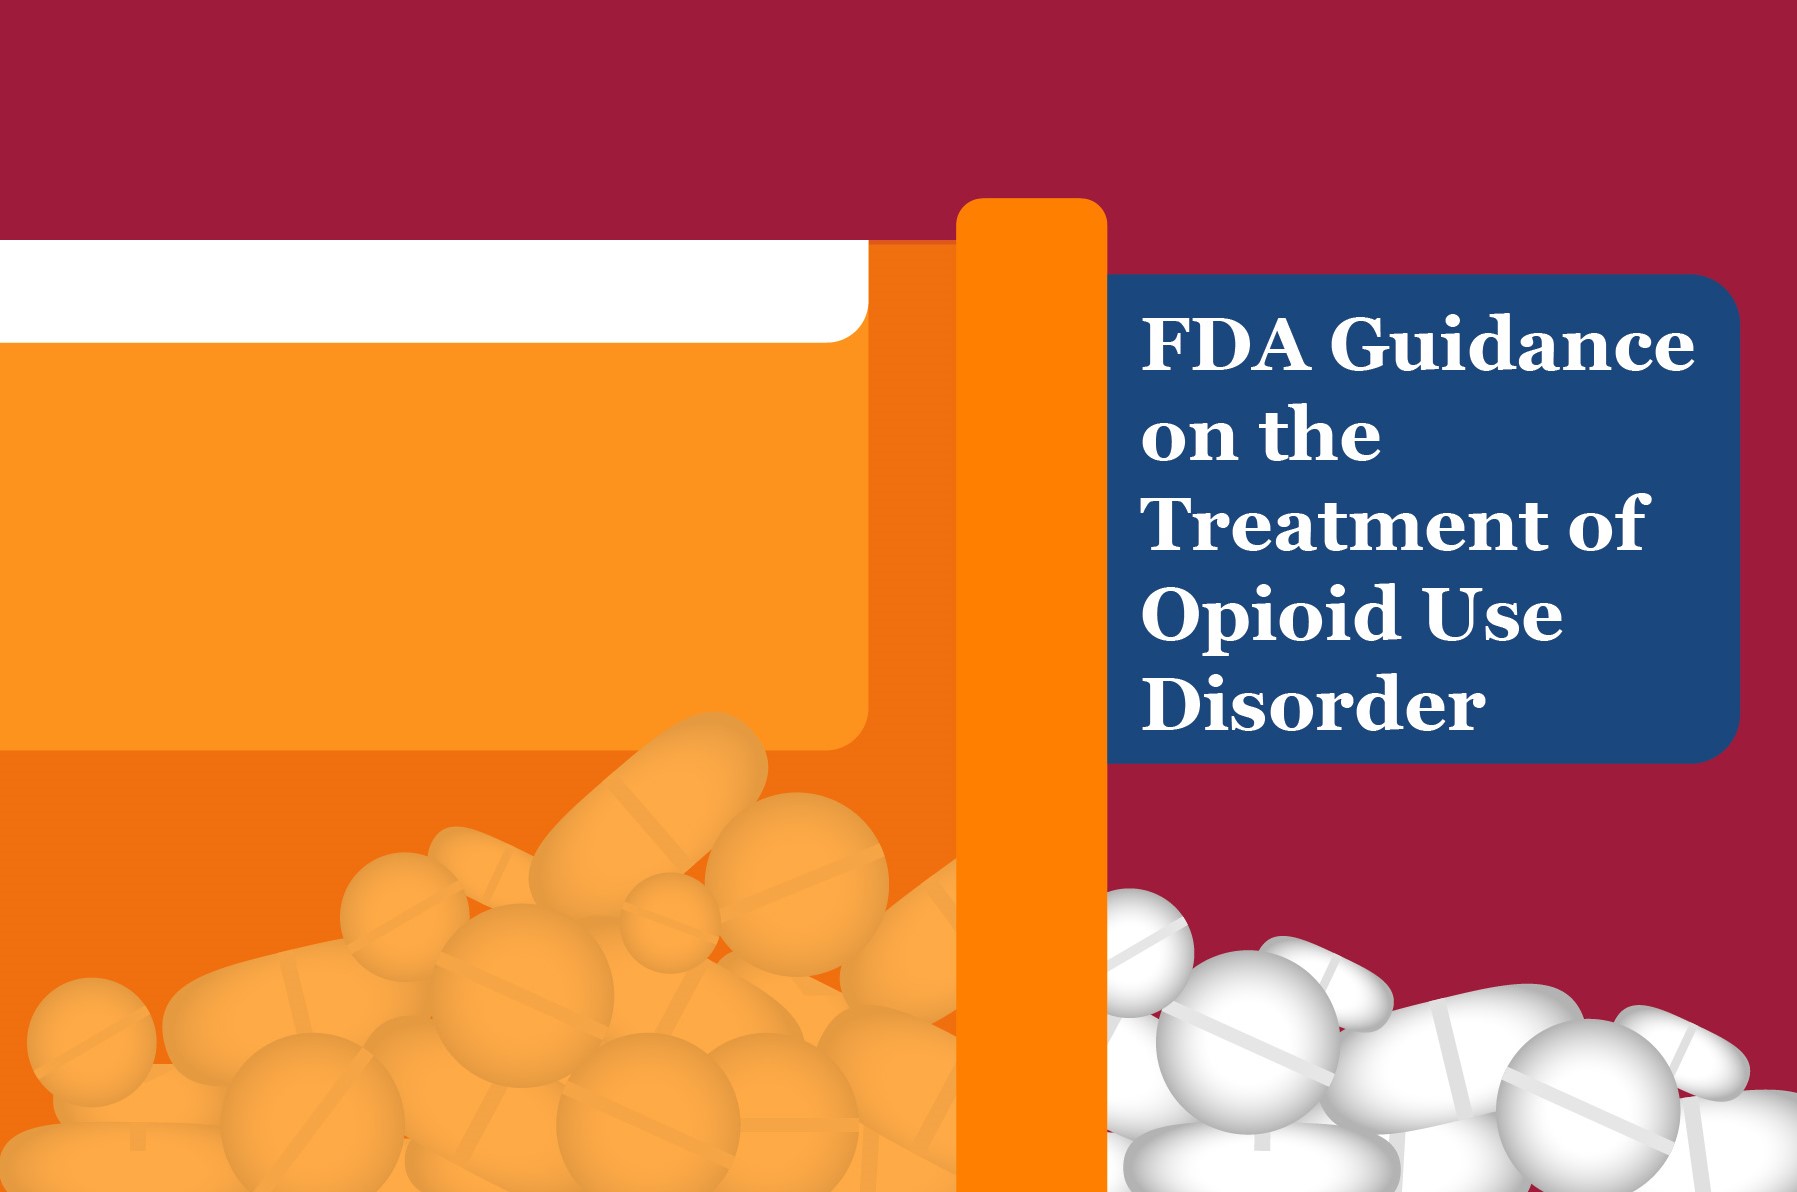 FDA Guidance on the Treatment of Opioid Use Disorder